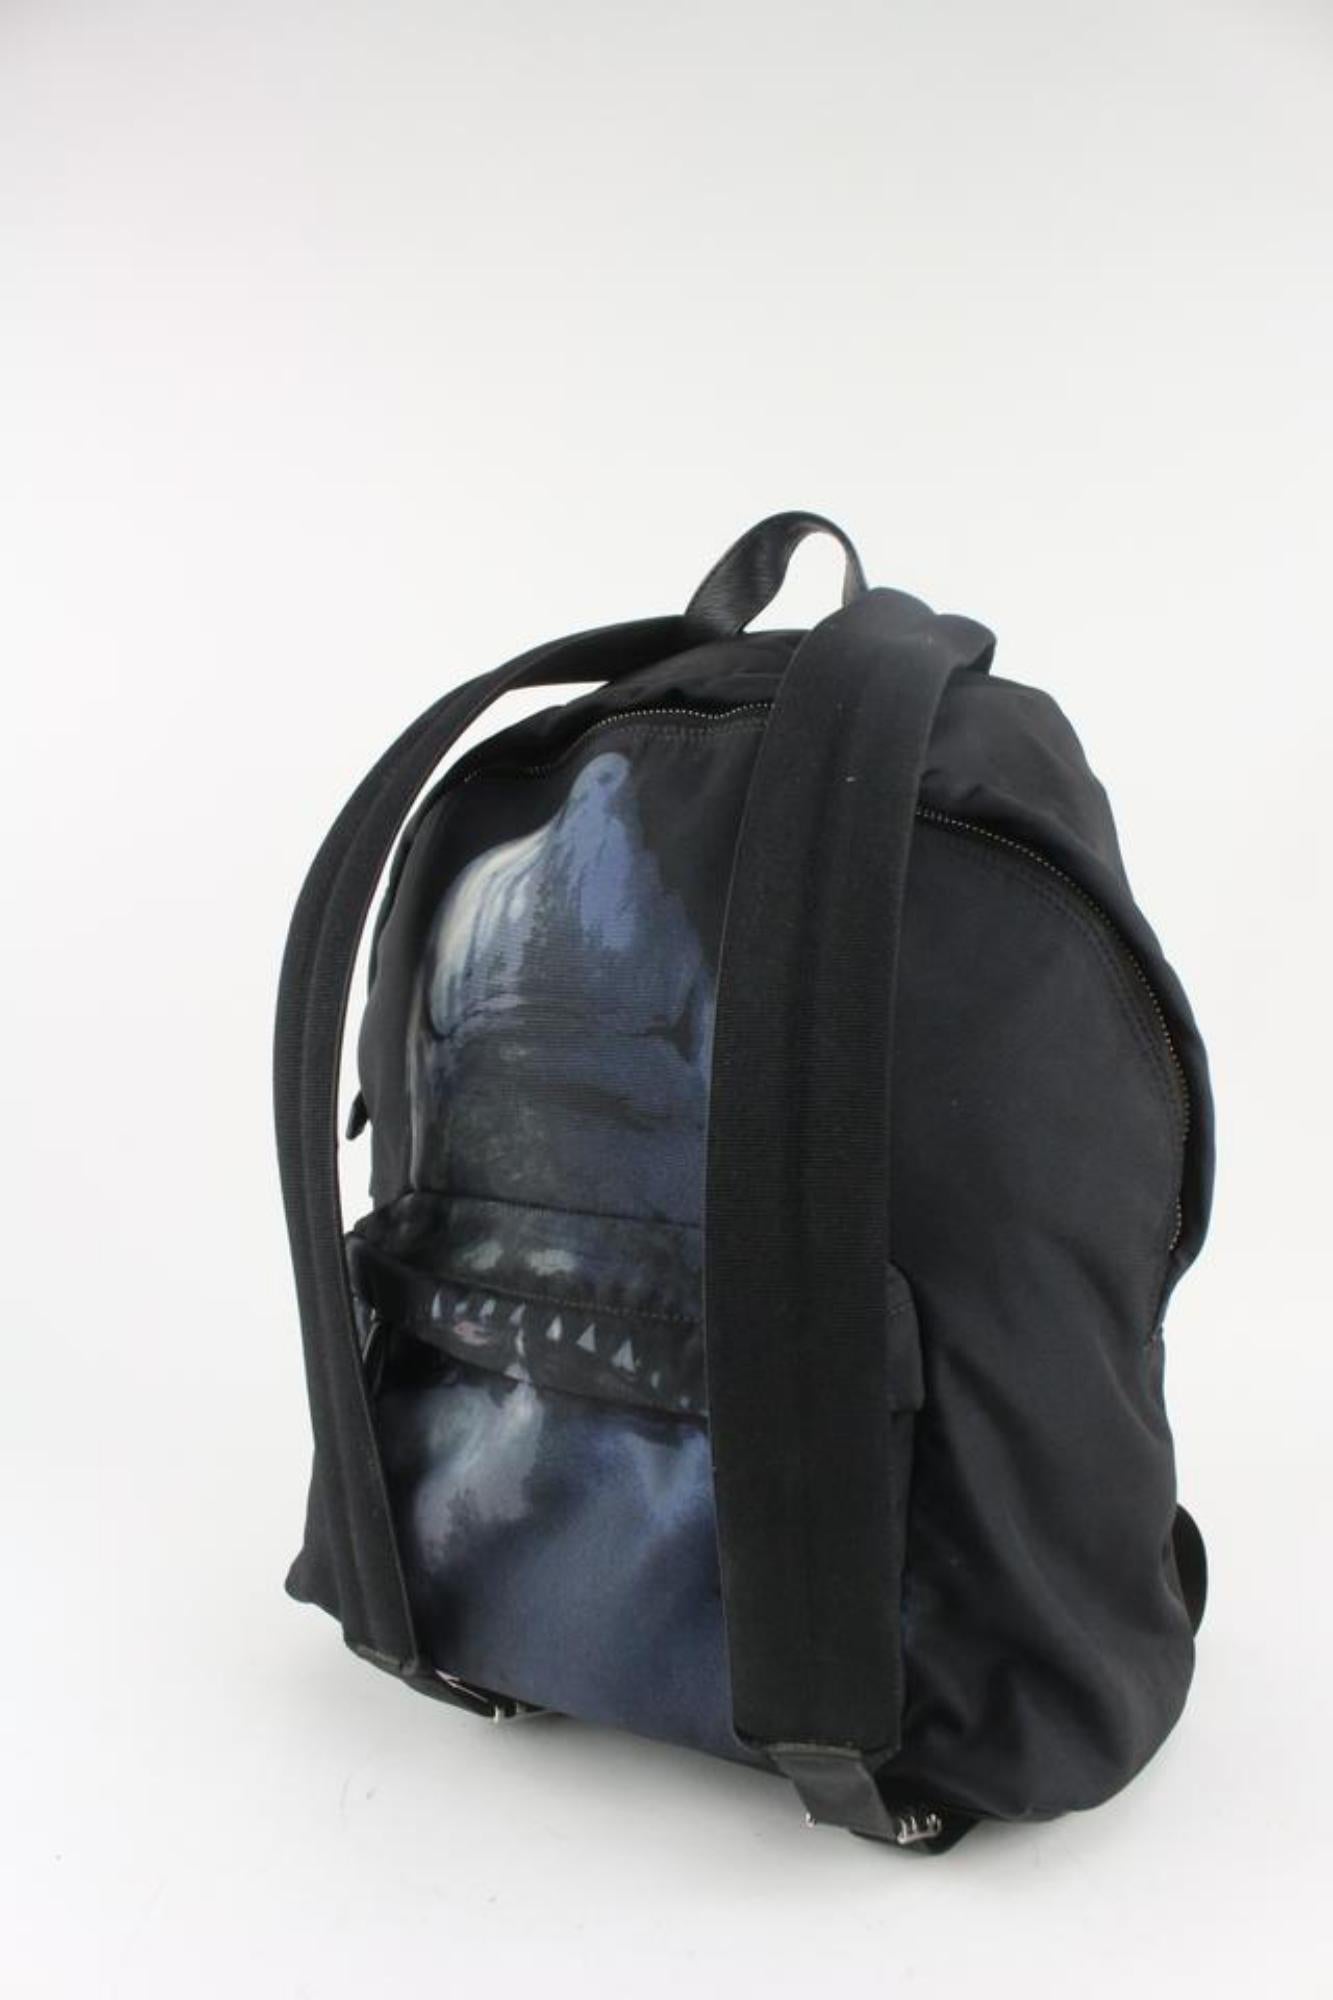 Givenchy Black Shark Backpack 1216gi29
Date Code/Serial Number: EX D 1107
Made In: Romania
Measurements: Length:  16